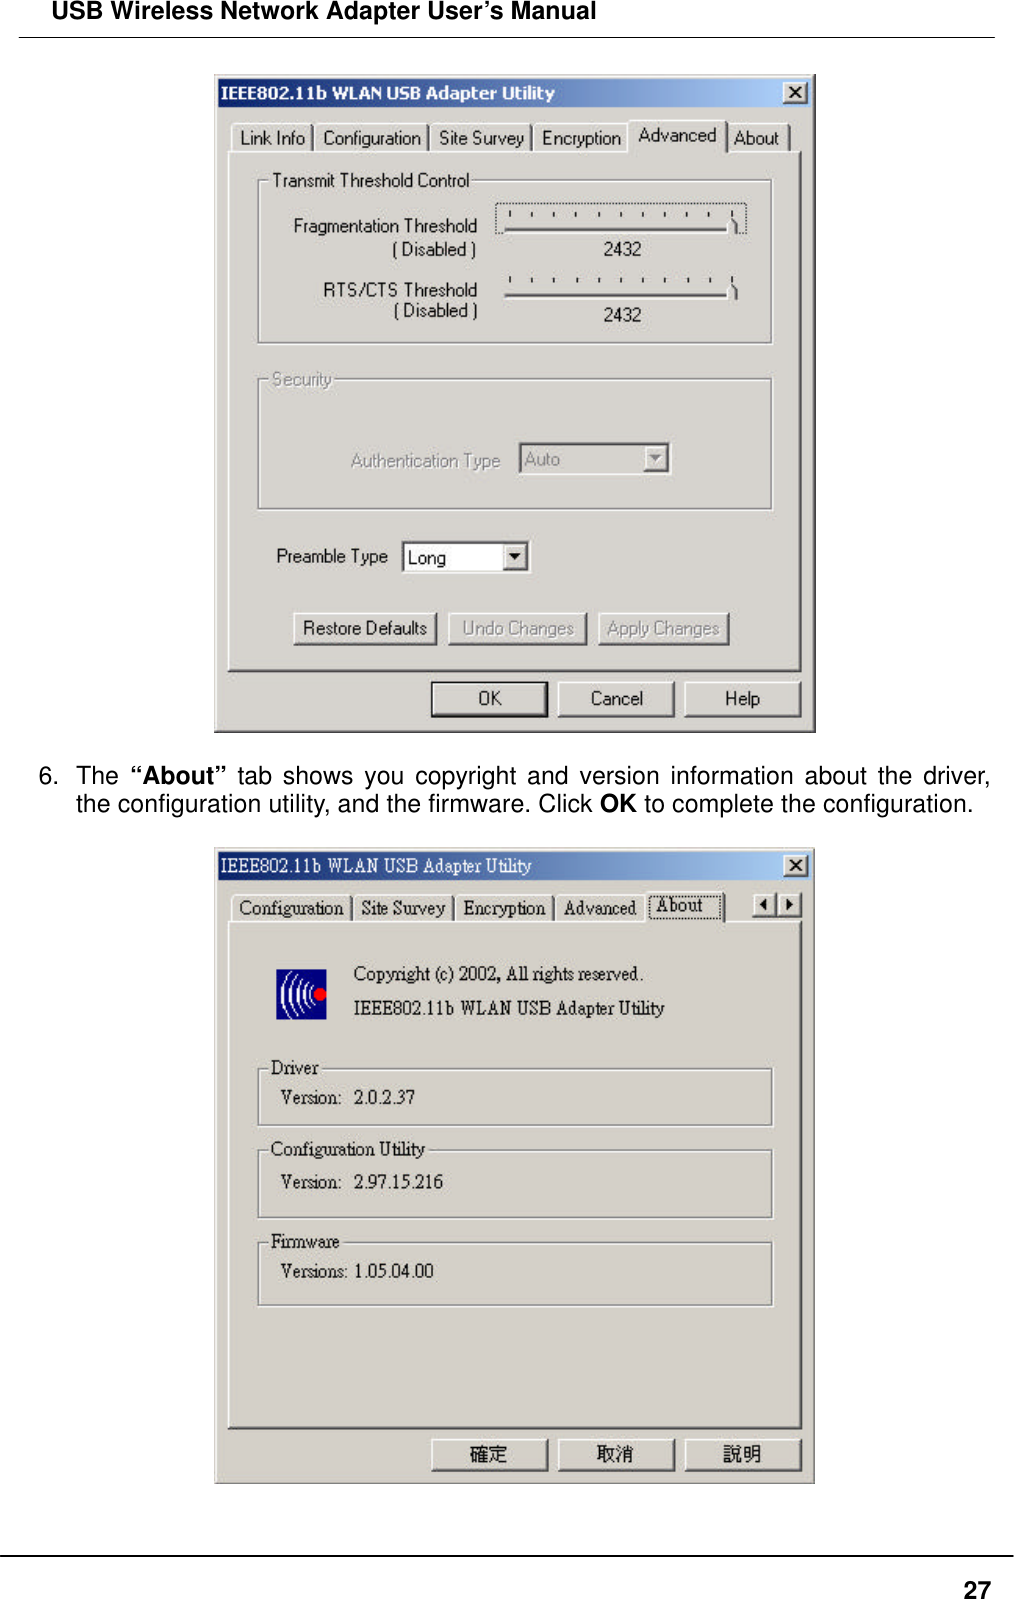  USB Wireless Network Adapter User’s Manual  27  6. The “About” tab shows you copyright and version information about the driver, the configuration utility, and the firmware. Click OK to complete the configuration.    